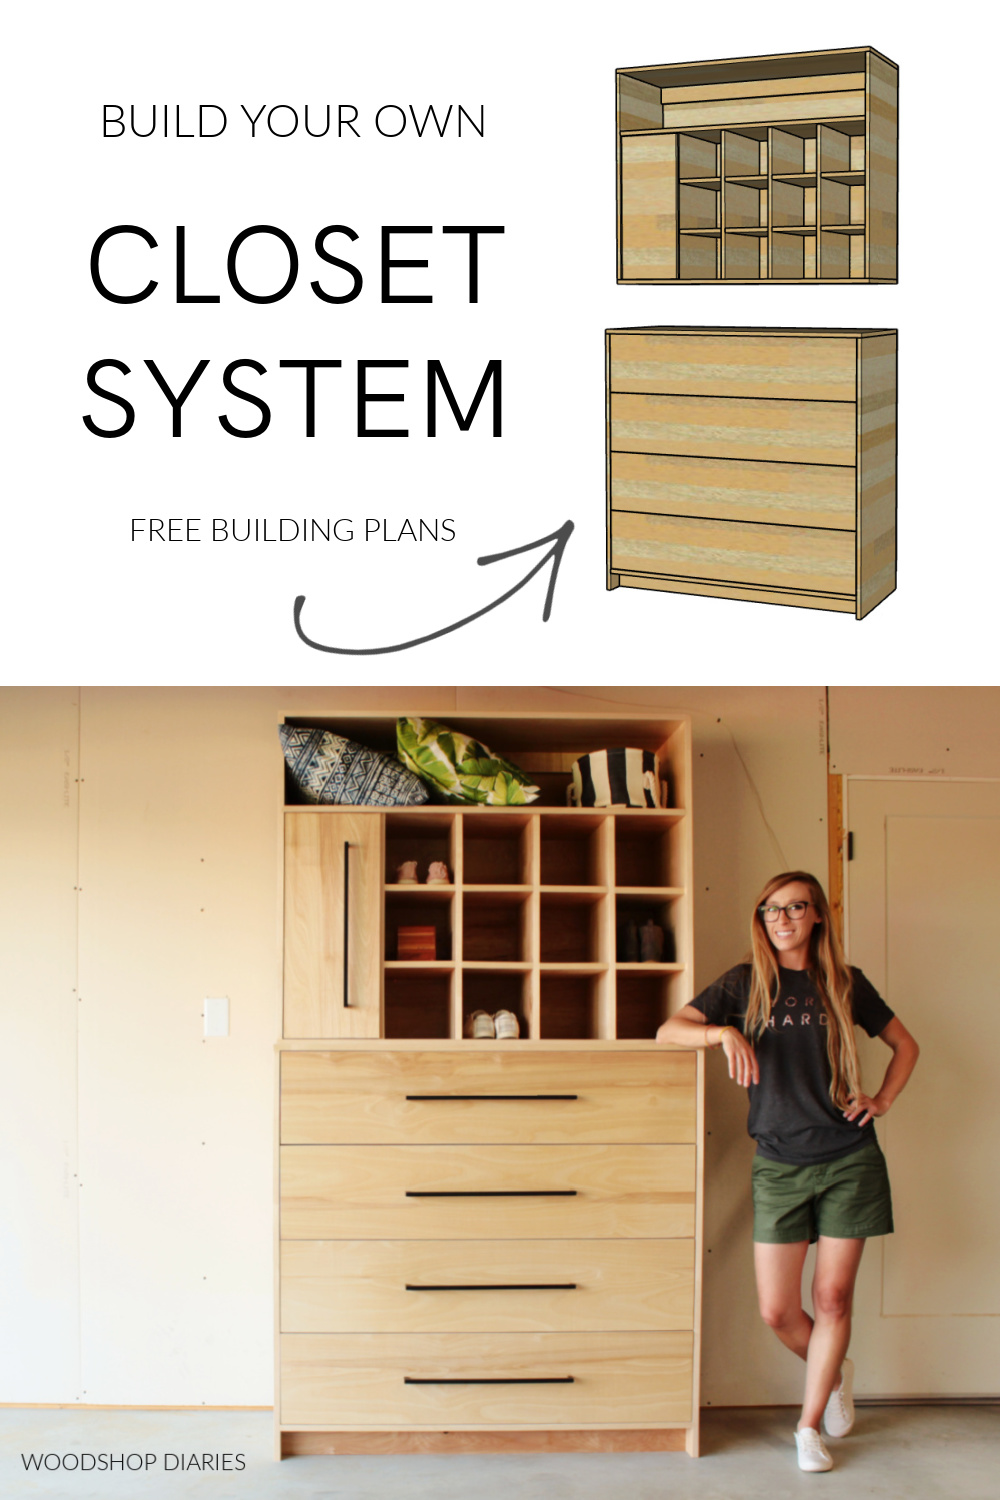 Pinterest image showing computer diagram of closet system at top and completed closet system on bottom with text "build your own closet system free building plans"